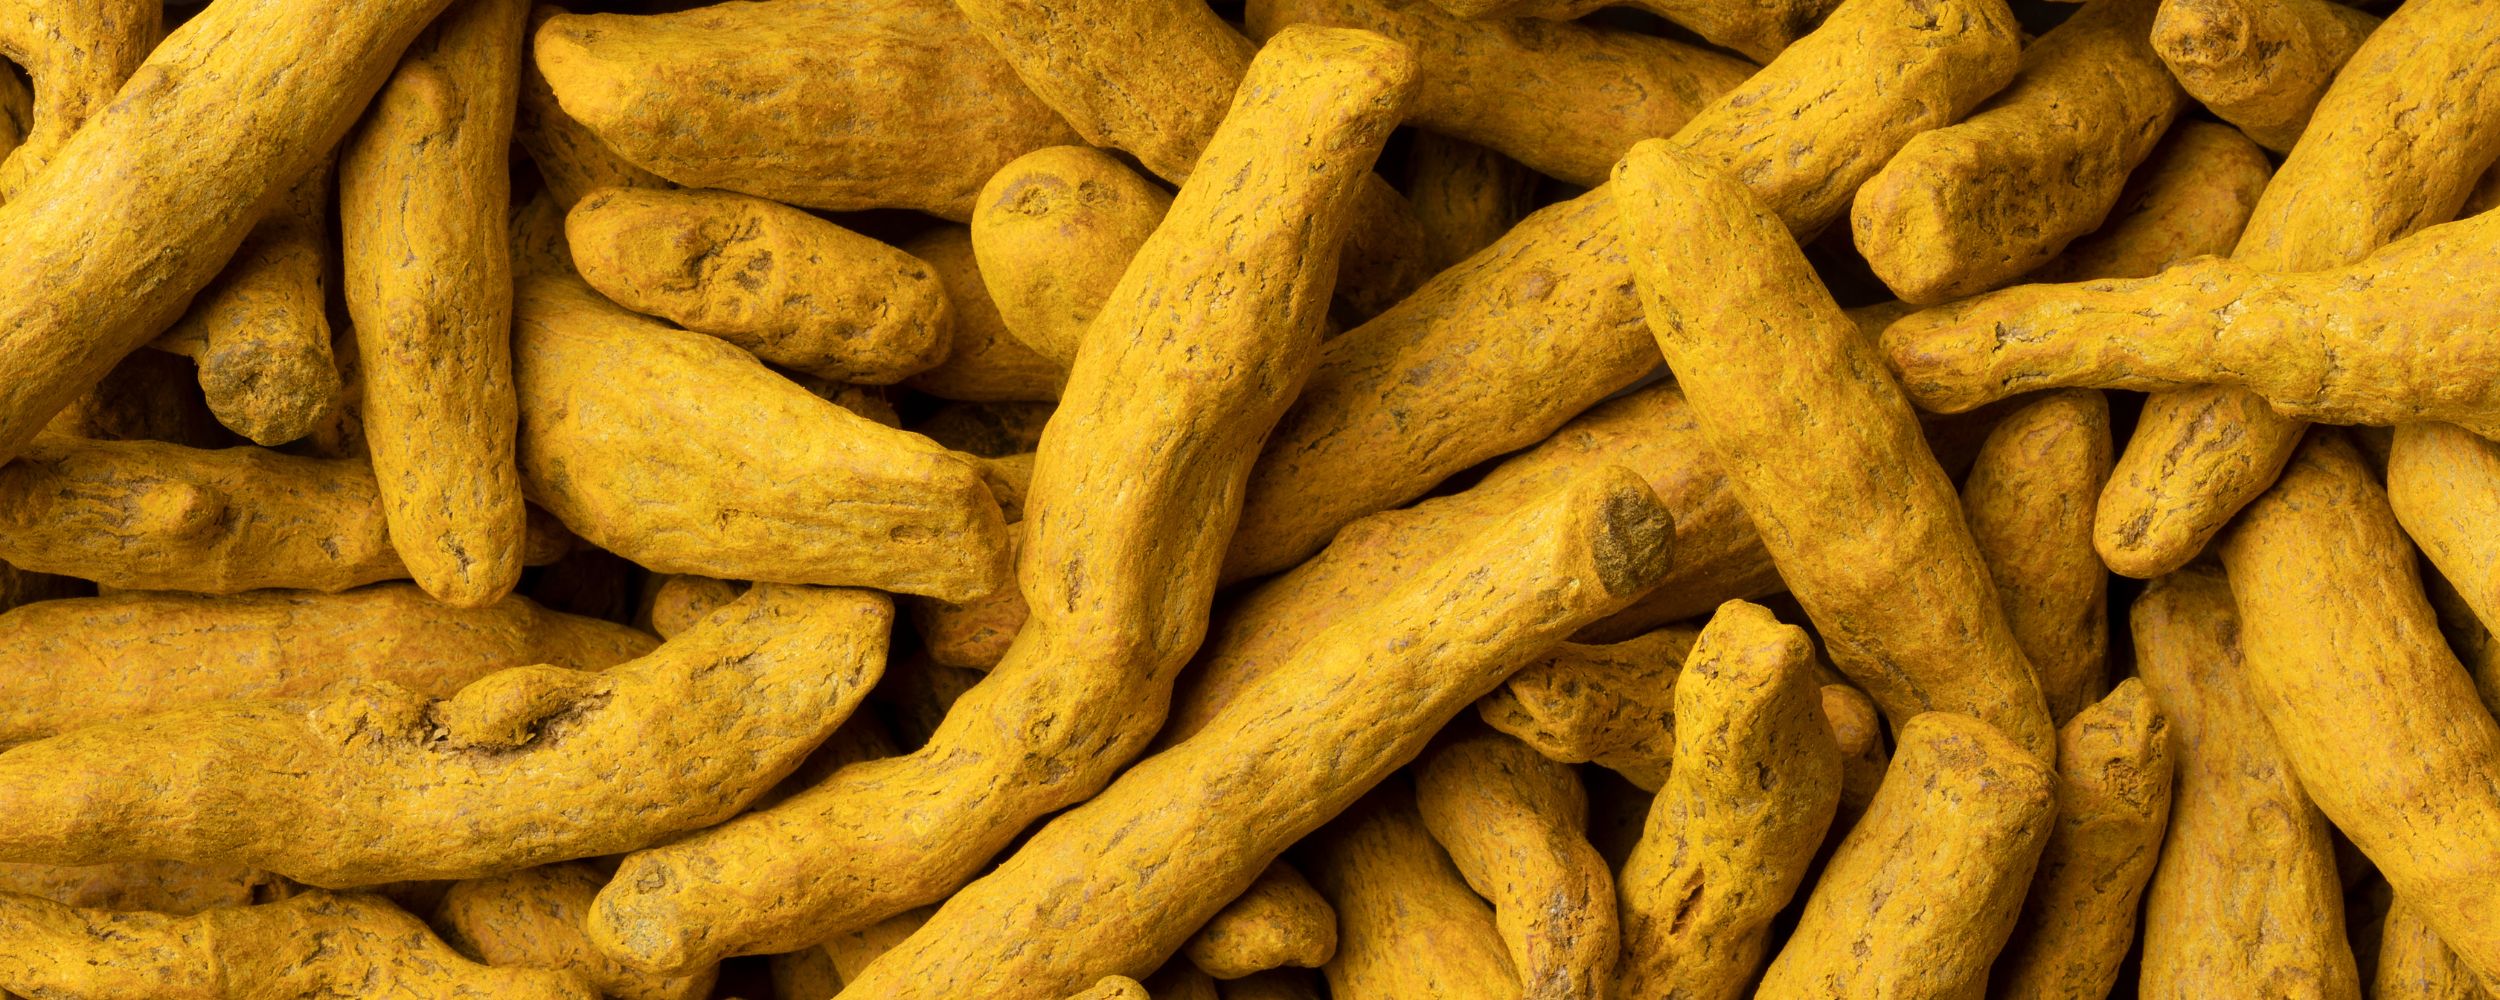 Turmeric Finger Manufacturers, Suppliers & Exporters From India